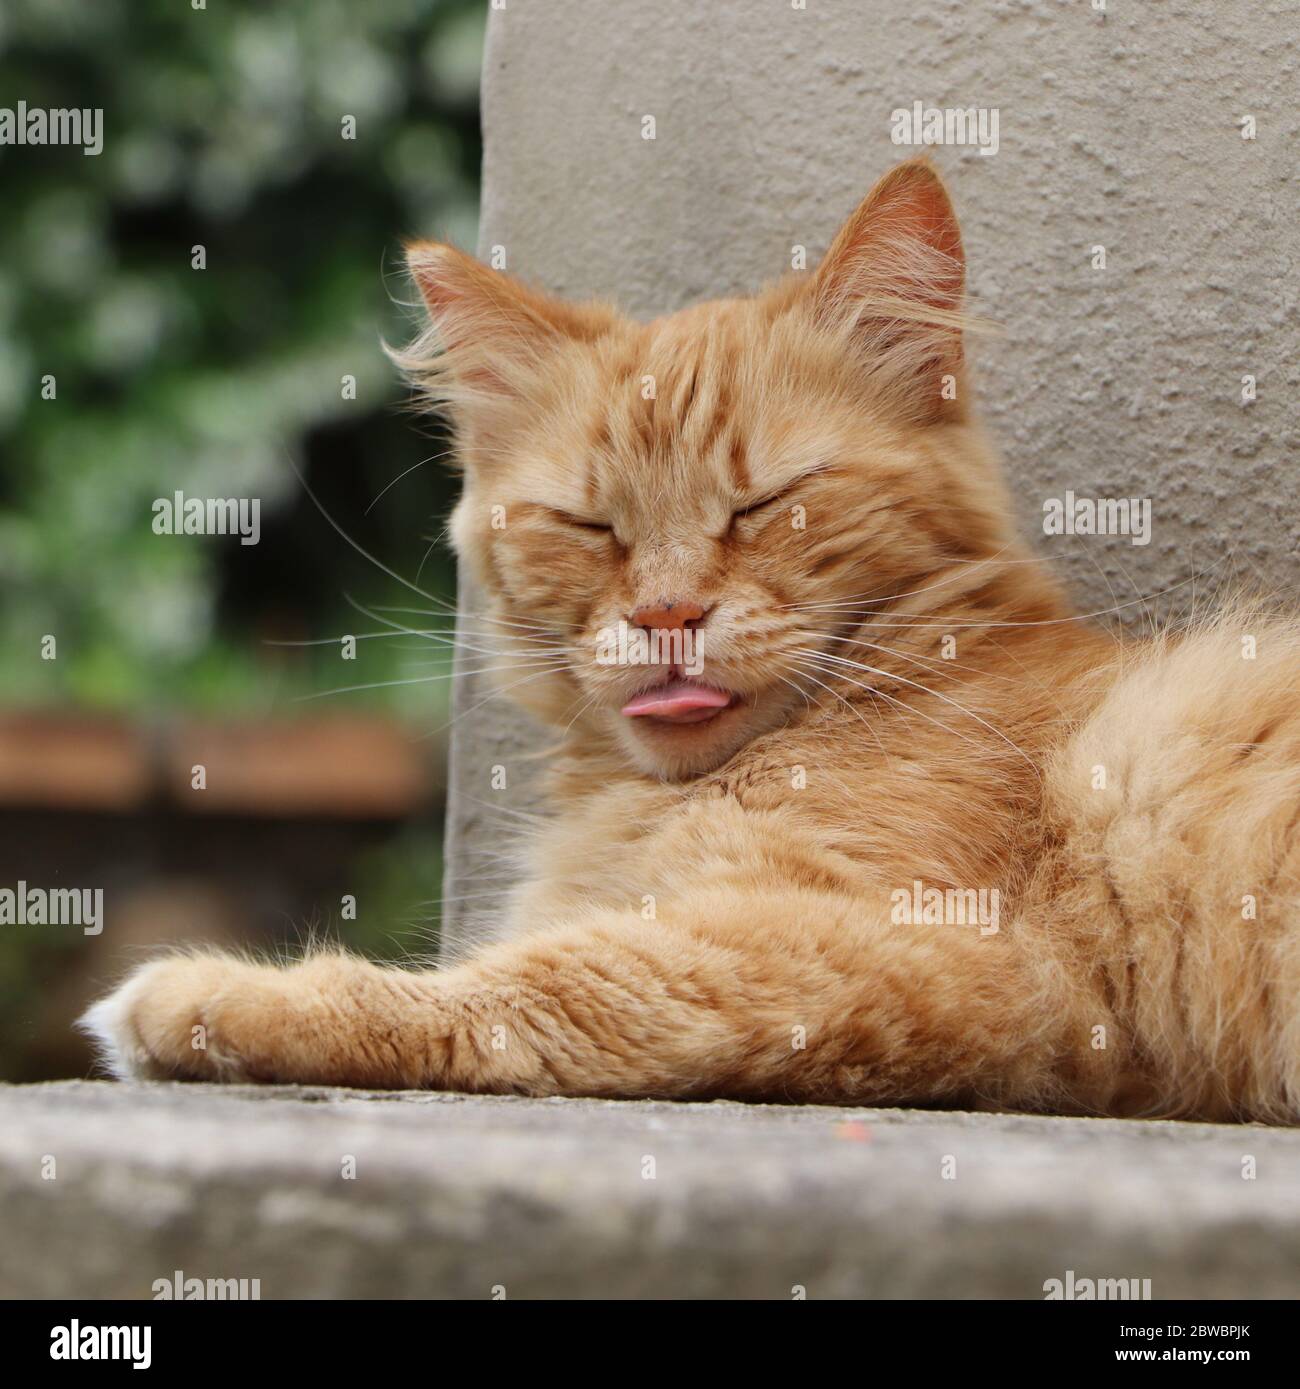 Cat with a cheeky tongue Stock Photo